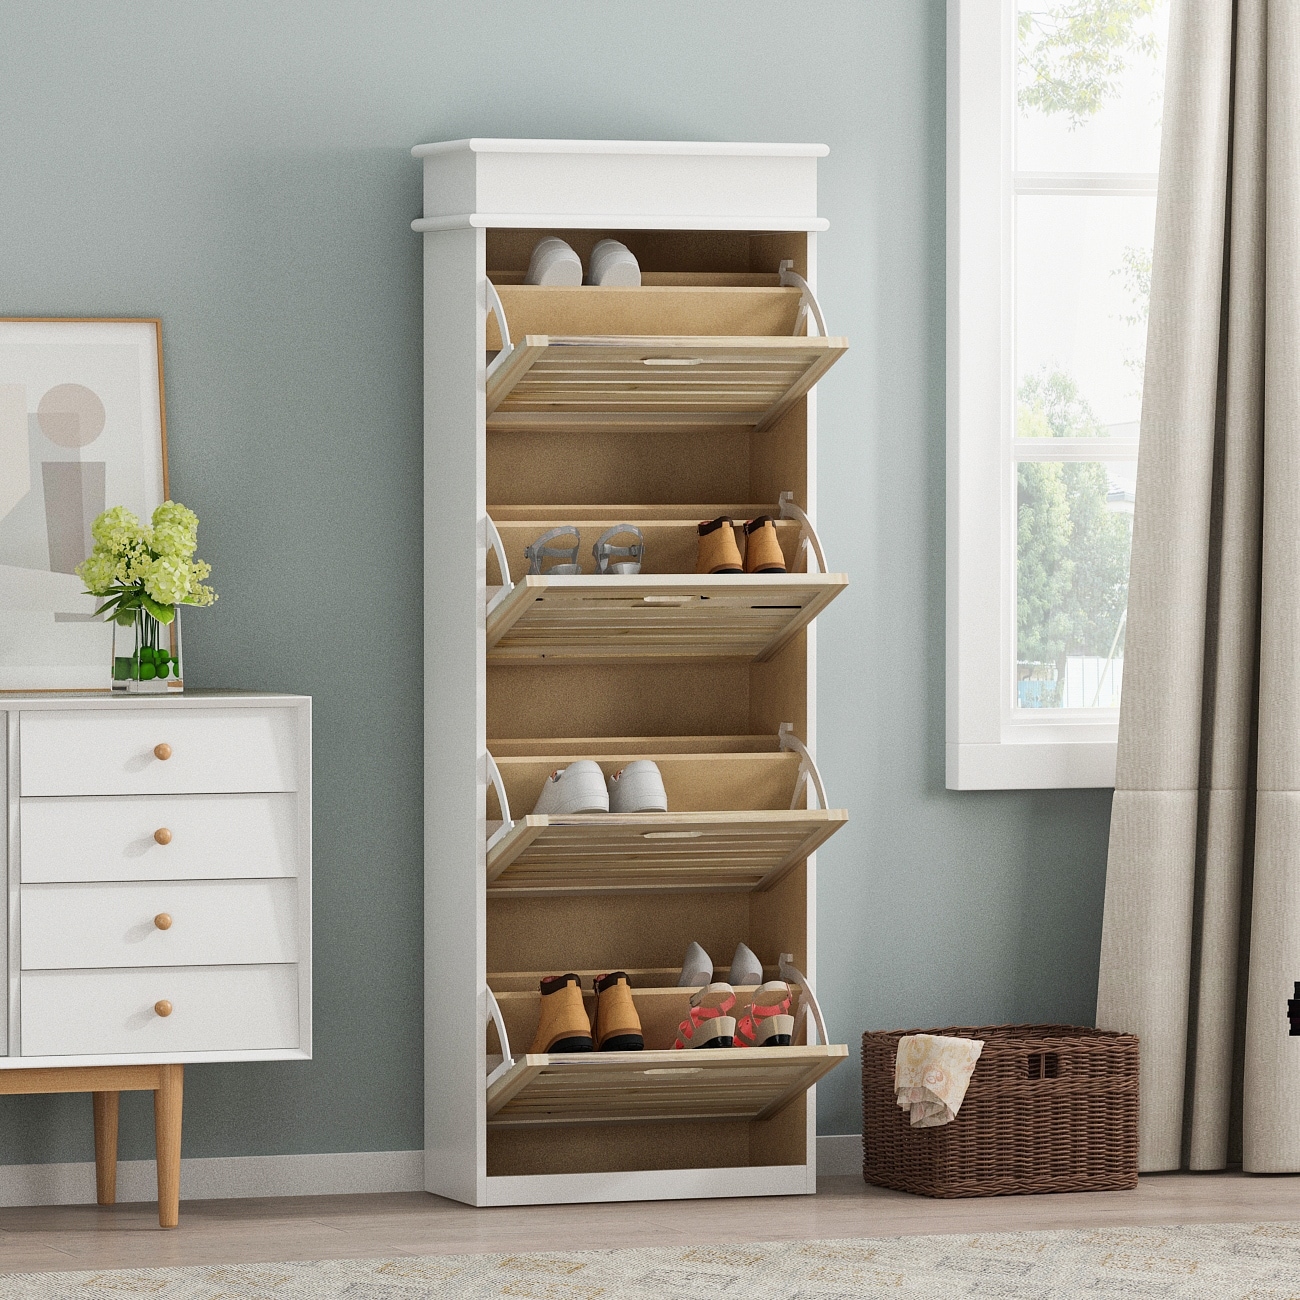 https://ak1.ostkcdn.com/images/products/is/images/direct/550aa9a3ee892ac6e5236603ac530bbf40e7ed13/Kerrogee-4-Drawes-Shoe-Cabinet---8-Tiers-Shoe-Rack---Up-to-16-Pairs.jpg